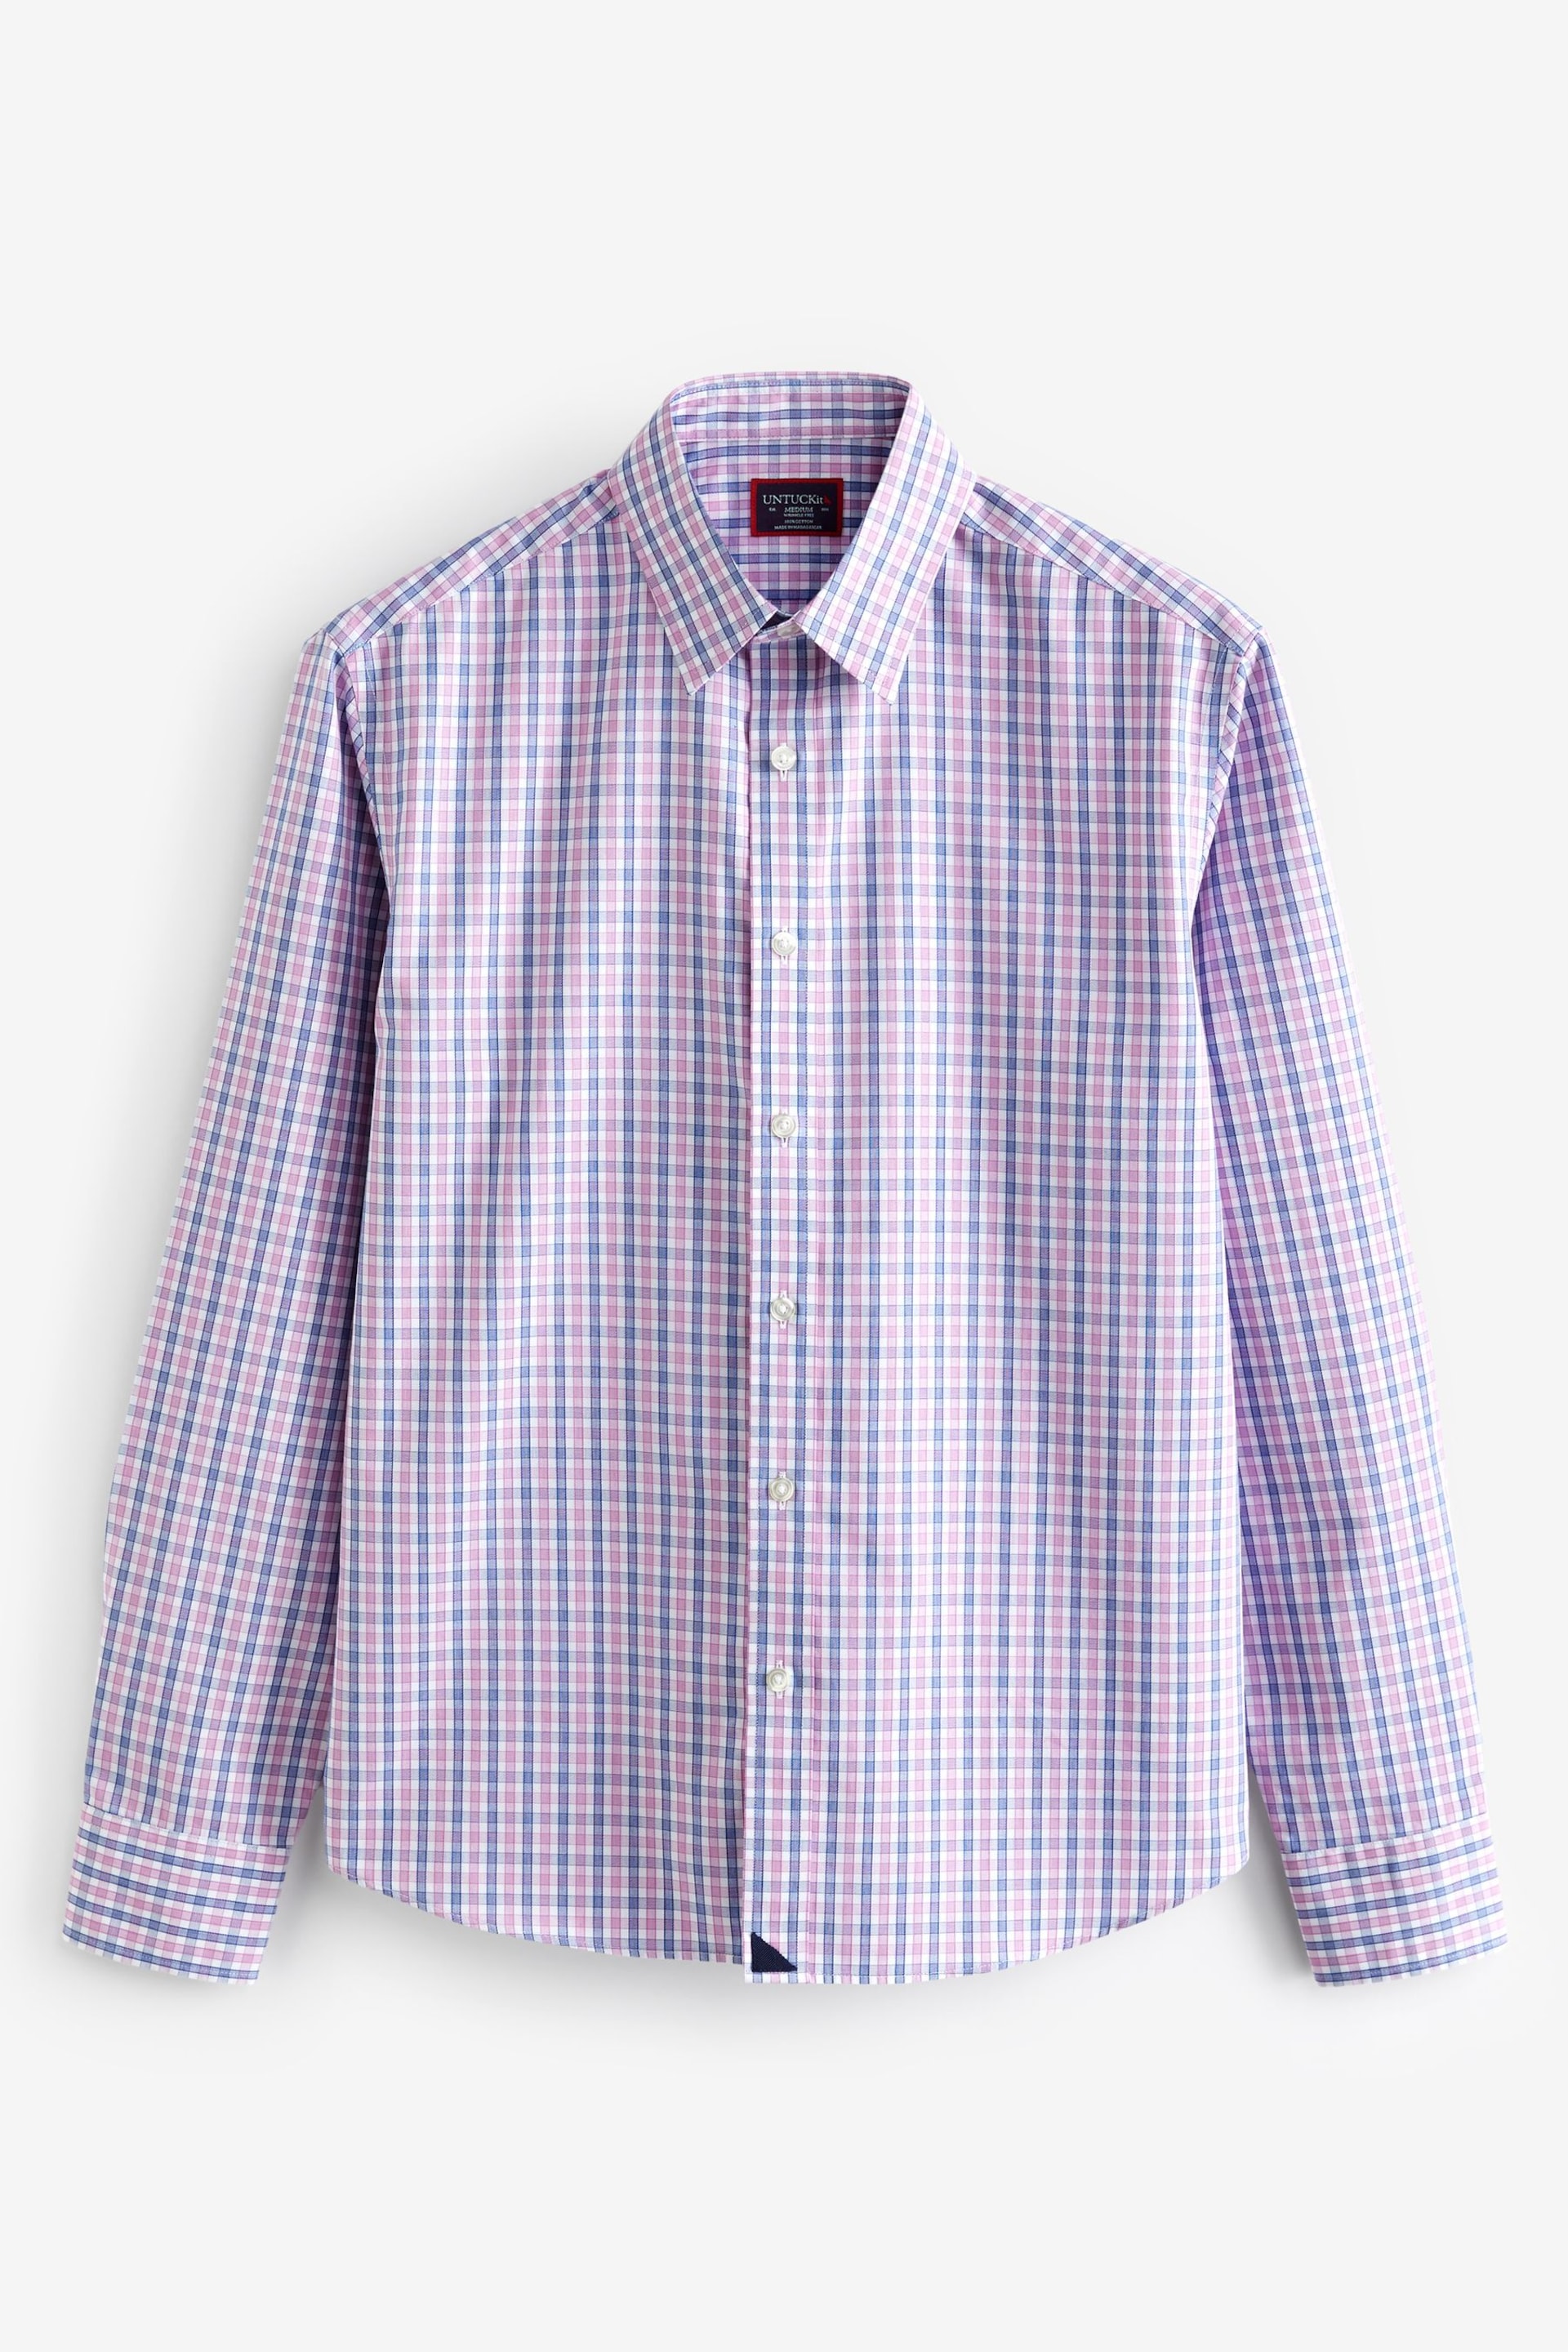 UNTUCKit Pink/Blue Wrinkle-Free Slim Fit Dolcetto Shirt - Image 5 of 6